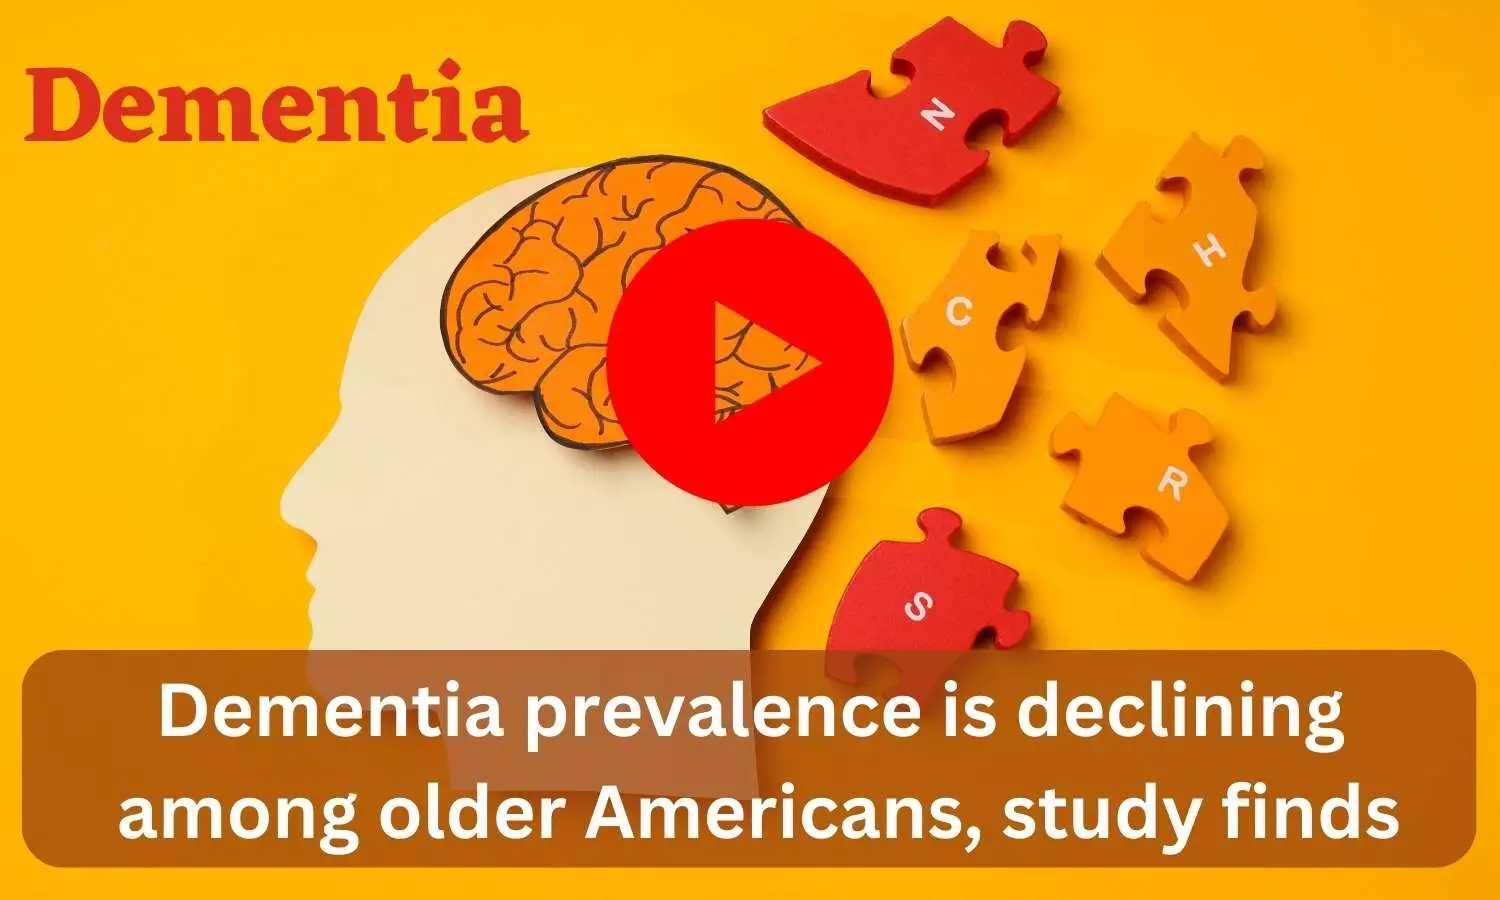 Dementia prevalence is declining among older Americans, study finds